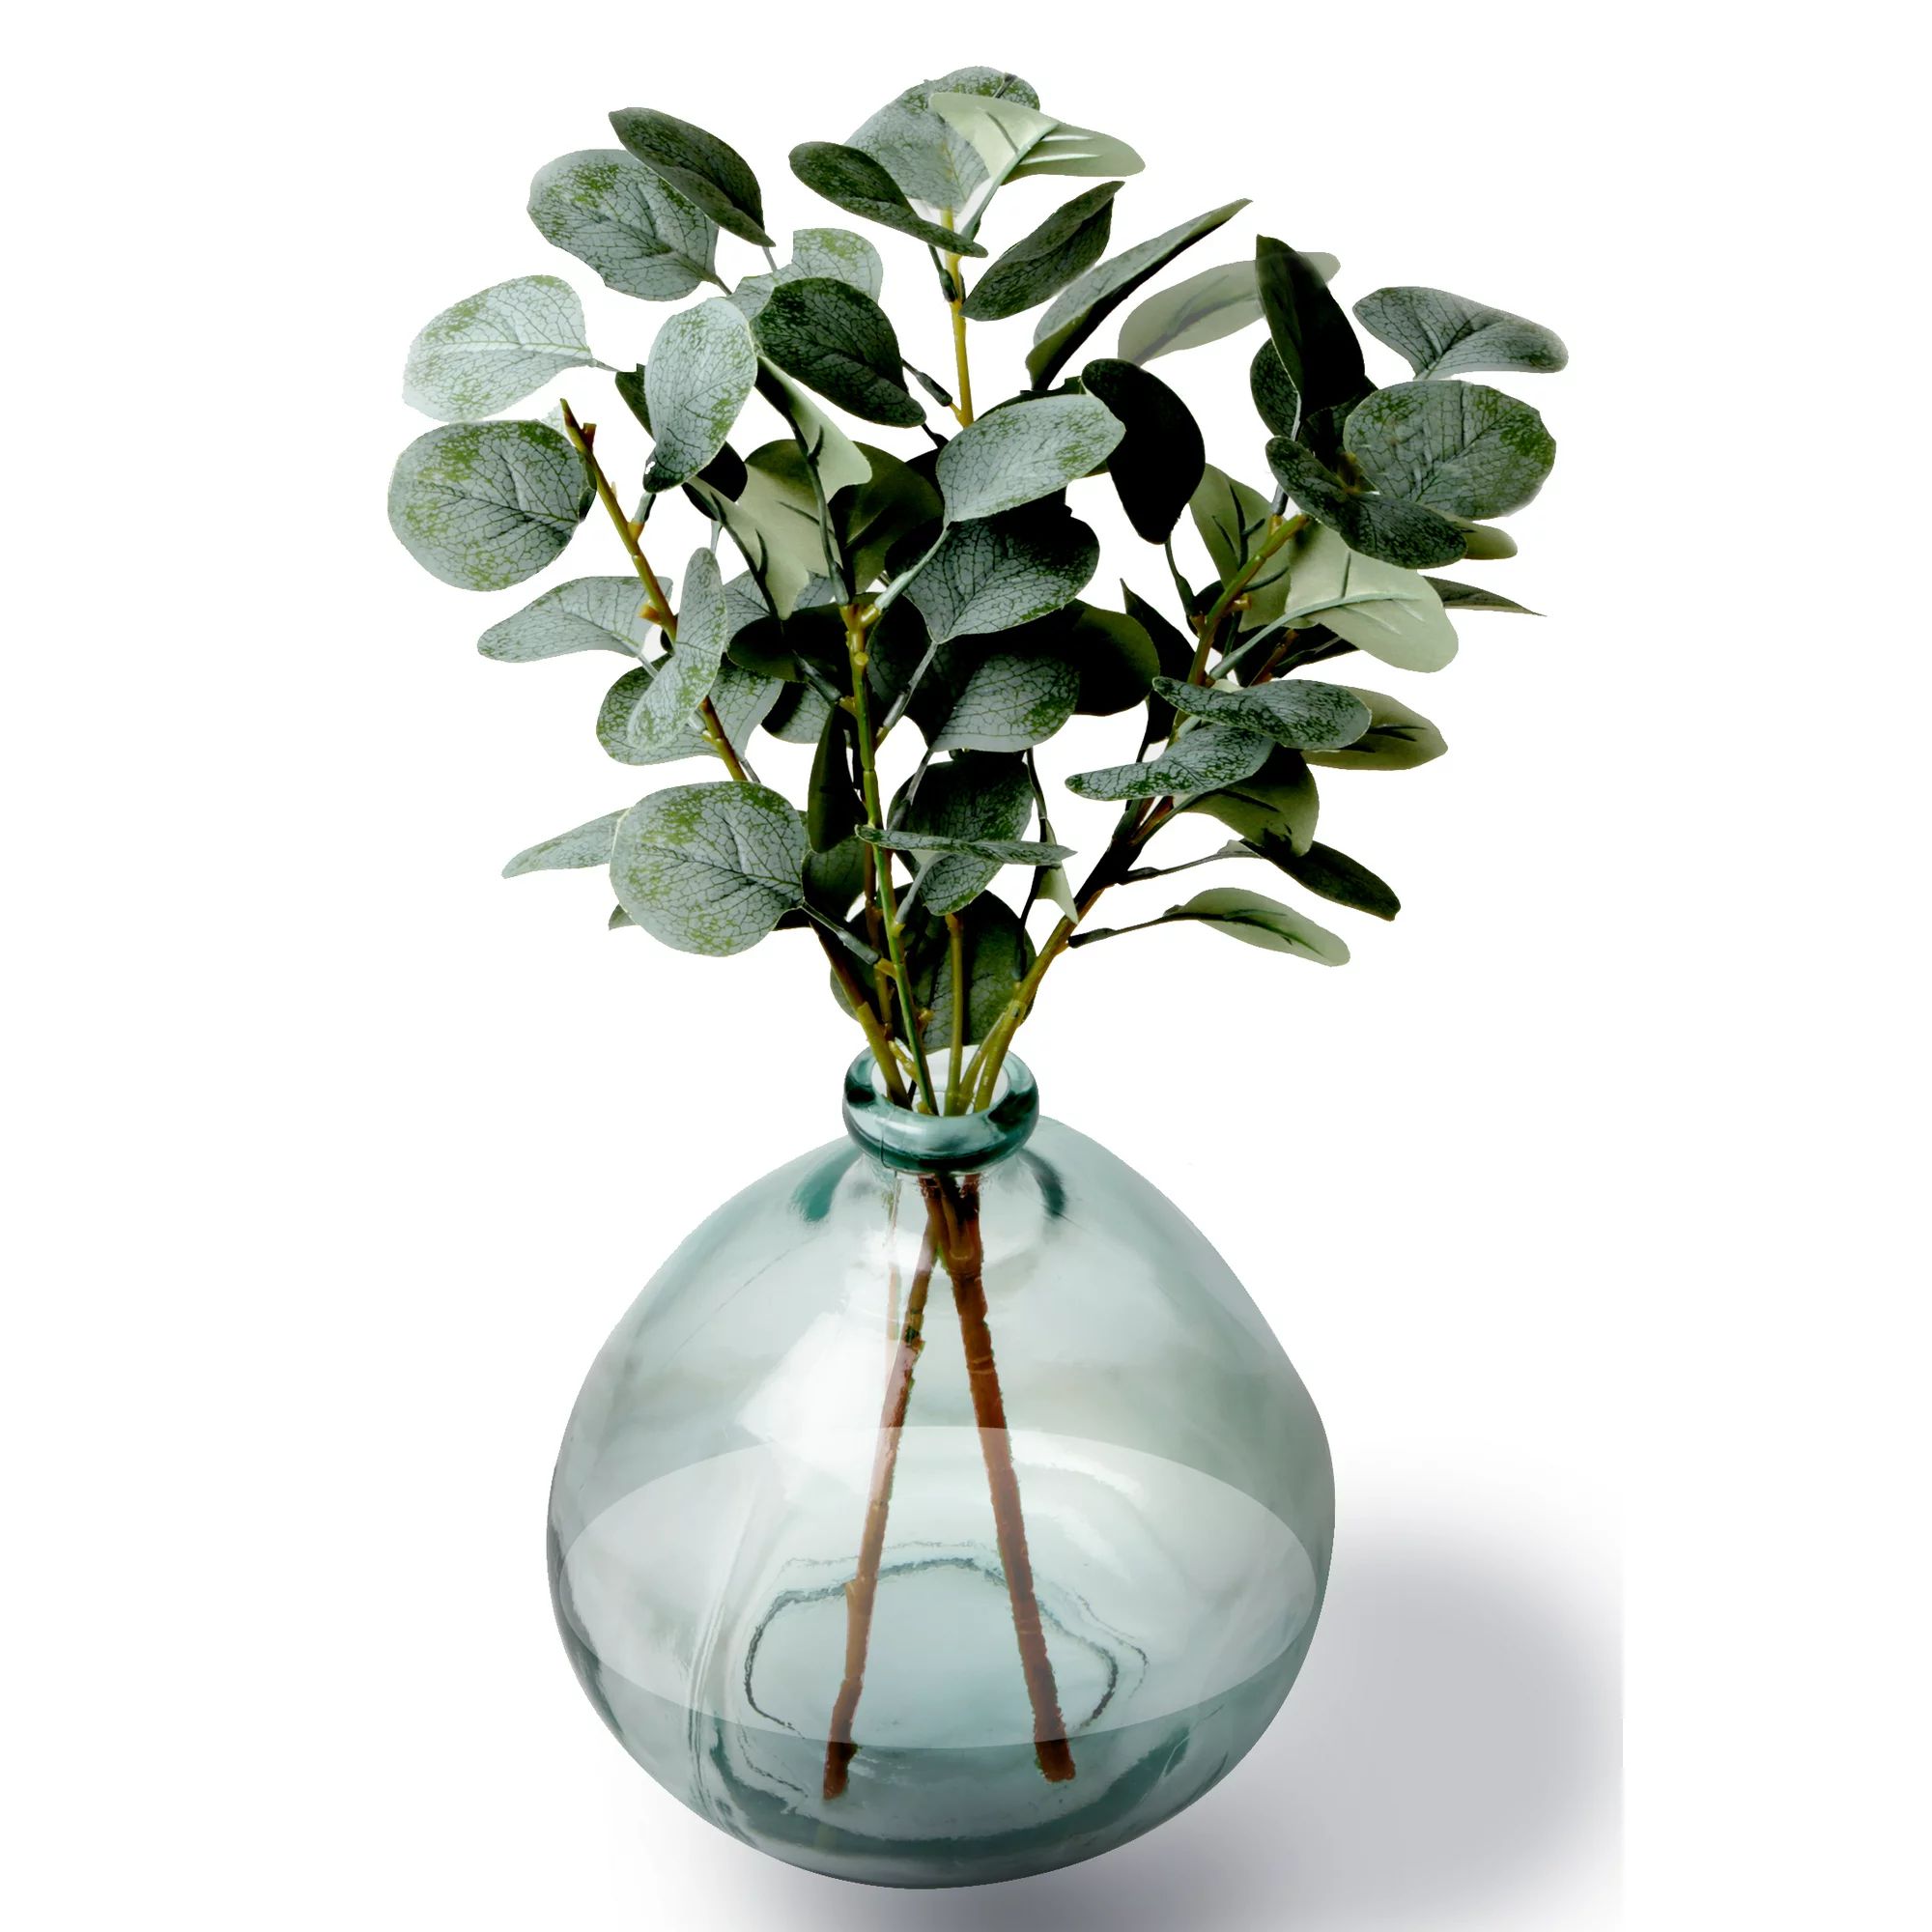 Mainstays Articifical Eucalyptus in Demijohn Vase 5.5 inches wide x 12 inches height | Walmart (US)